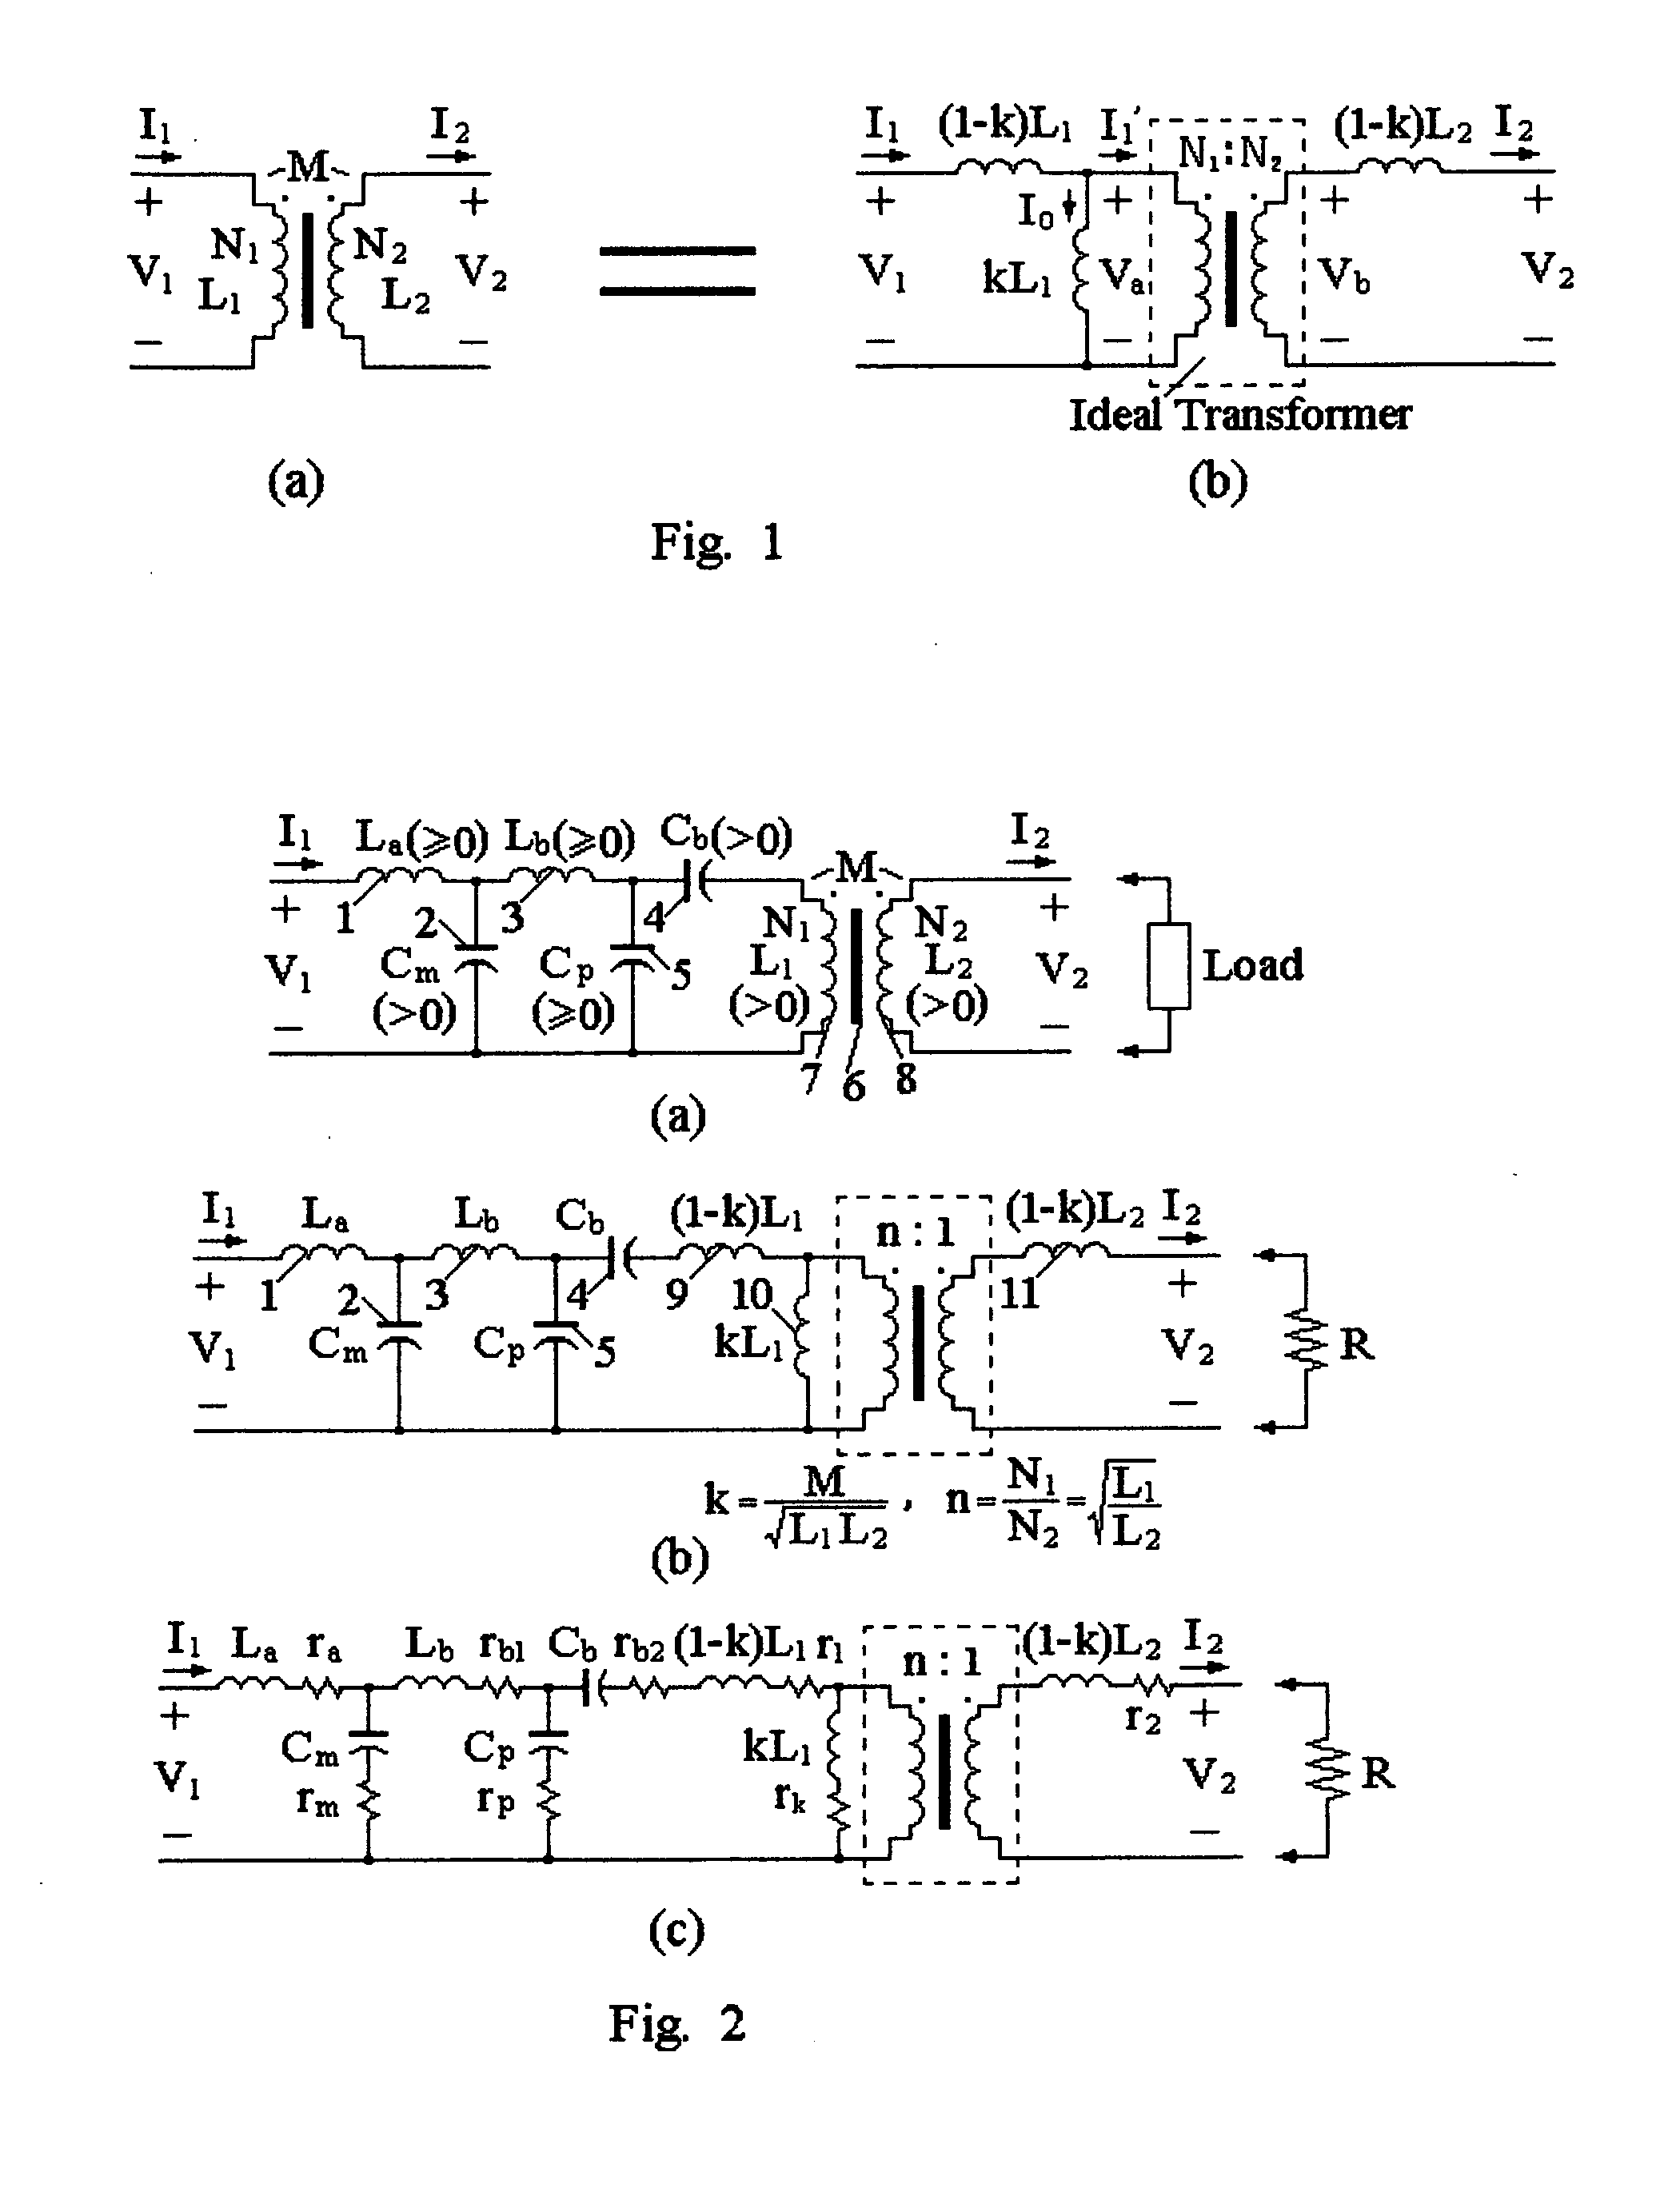 Methods and configurations of lc combined transformers and effective utilizations of cores therein